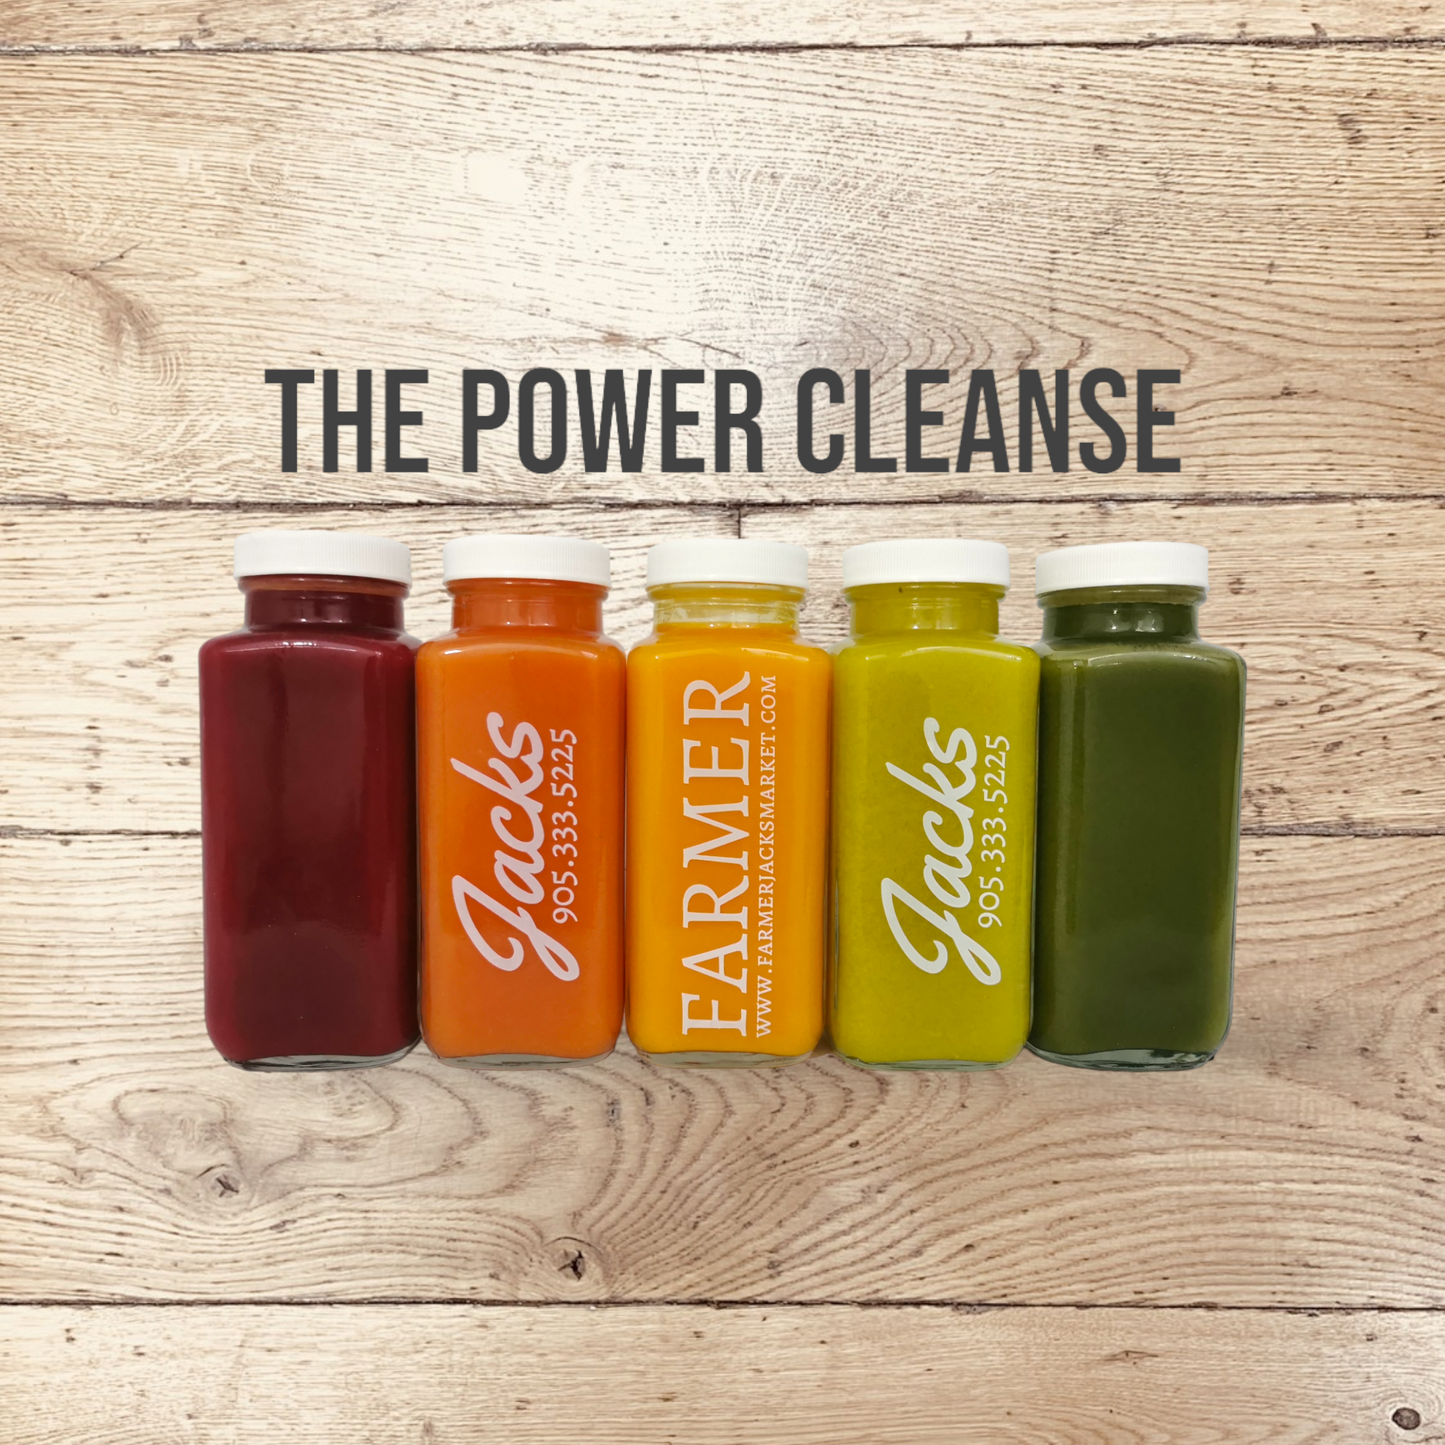 Farmer Jack's Power Cleanse image - 5 gleaming glass bottles, stamped with Farmer Jack's branding, which pops against the brightly coloured juices within them.